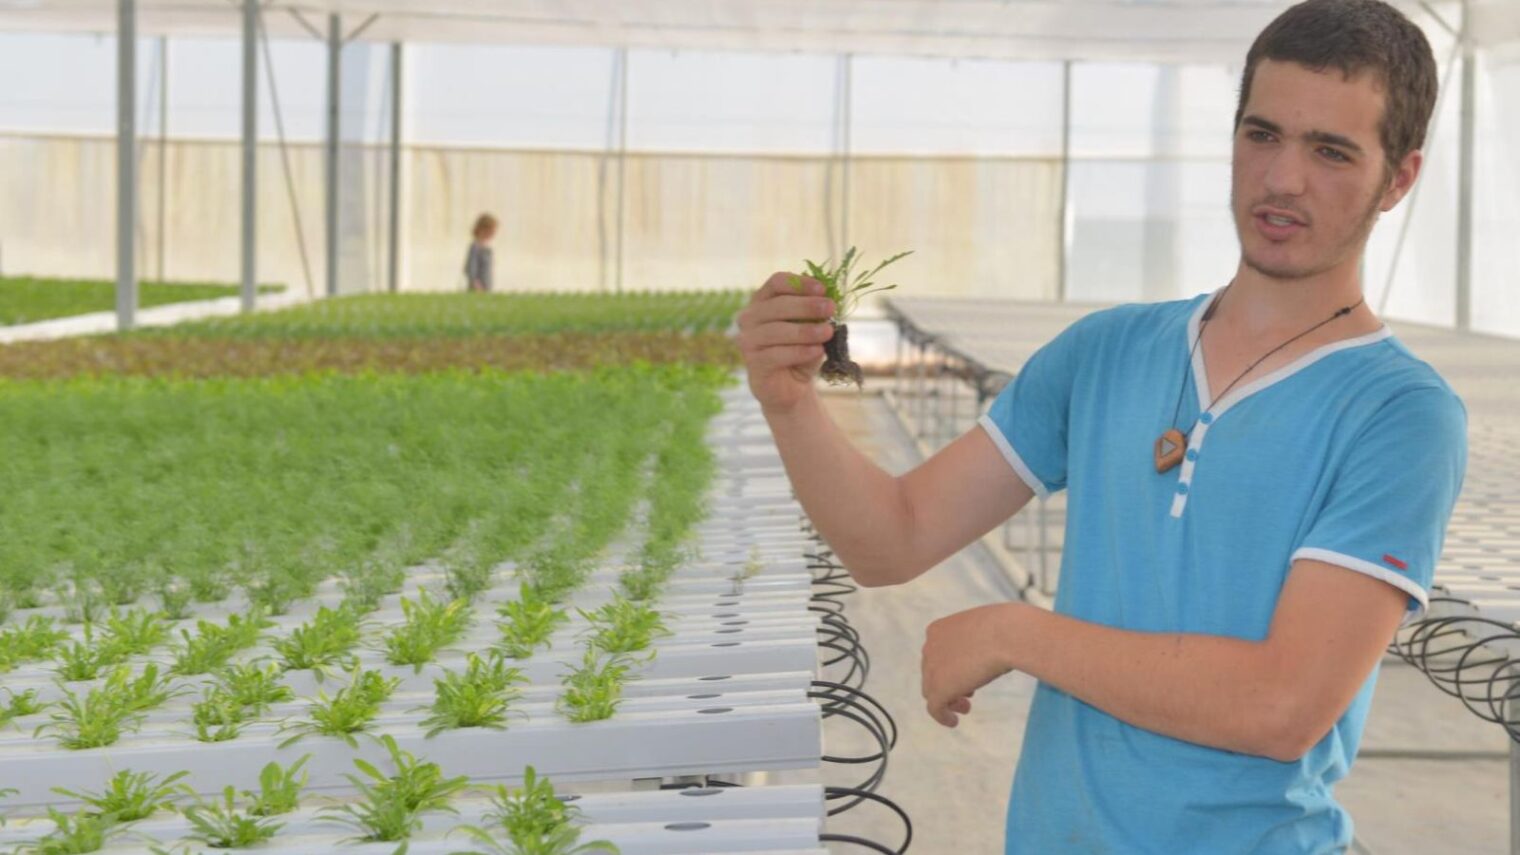 Tohar, a young Kaima farmer, explaining hydroponics to a visitor at Kaima’s new hydroponic greenhouse at the Jerusalem Botanical Gardens. Photo by Judith Harpaz